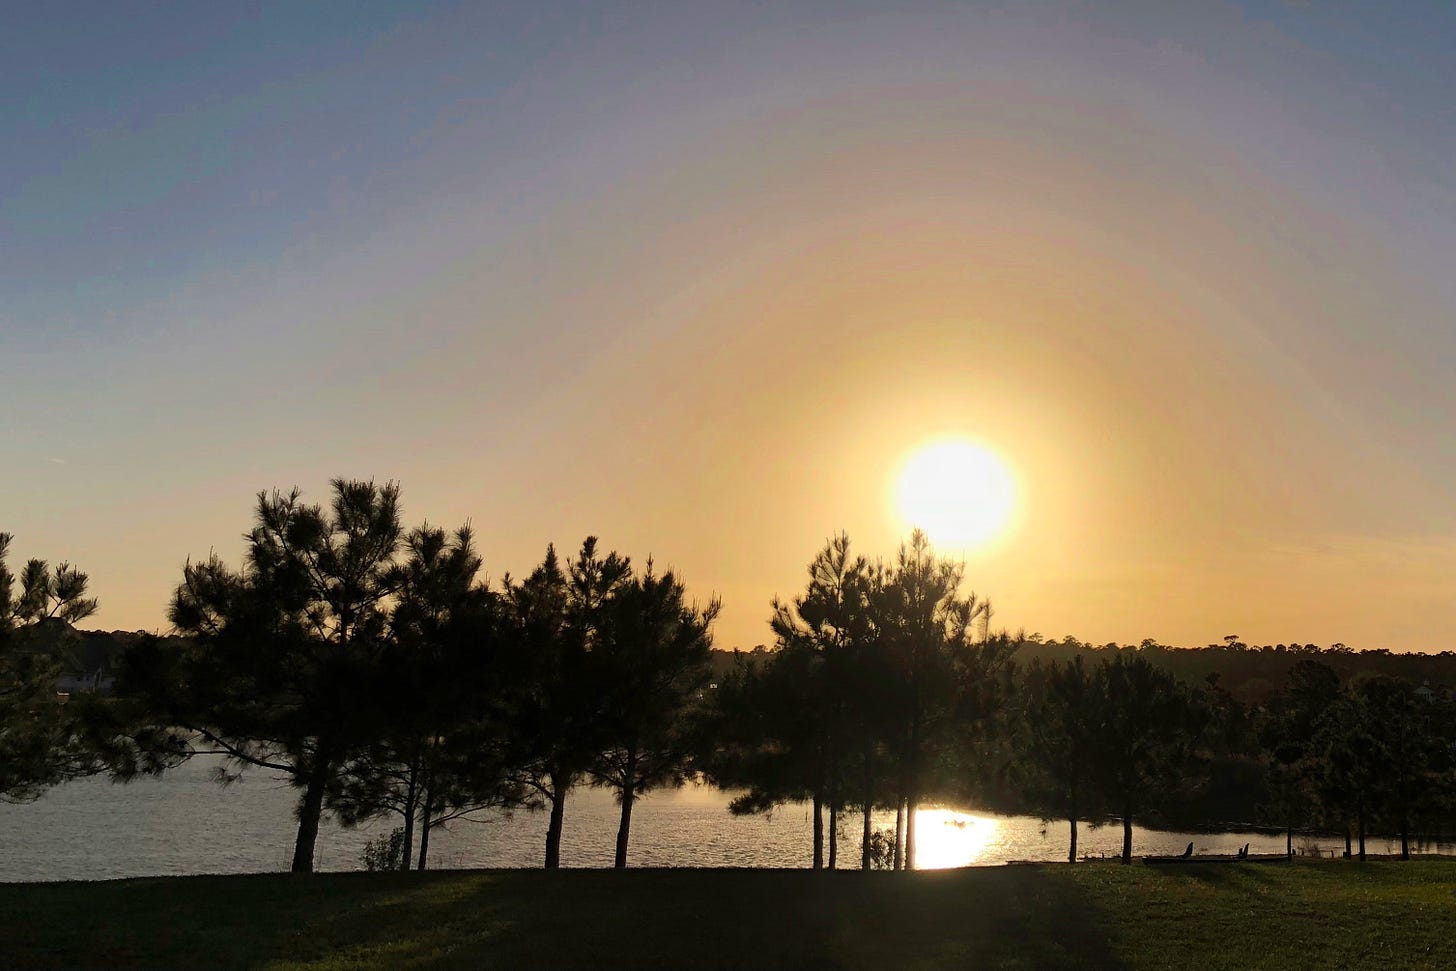 A sunset with the sun just above the horizon line casting an orangish/yellow halo across the blue sky and the sun’s reflection in the lake in the foreground